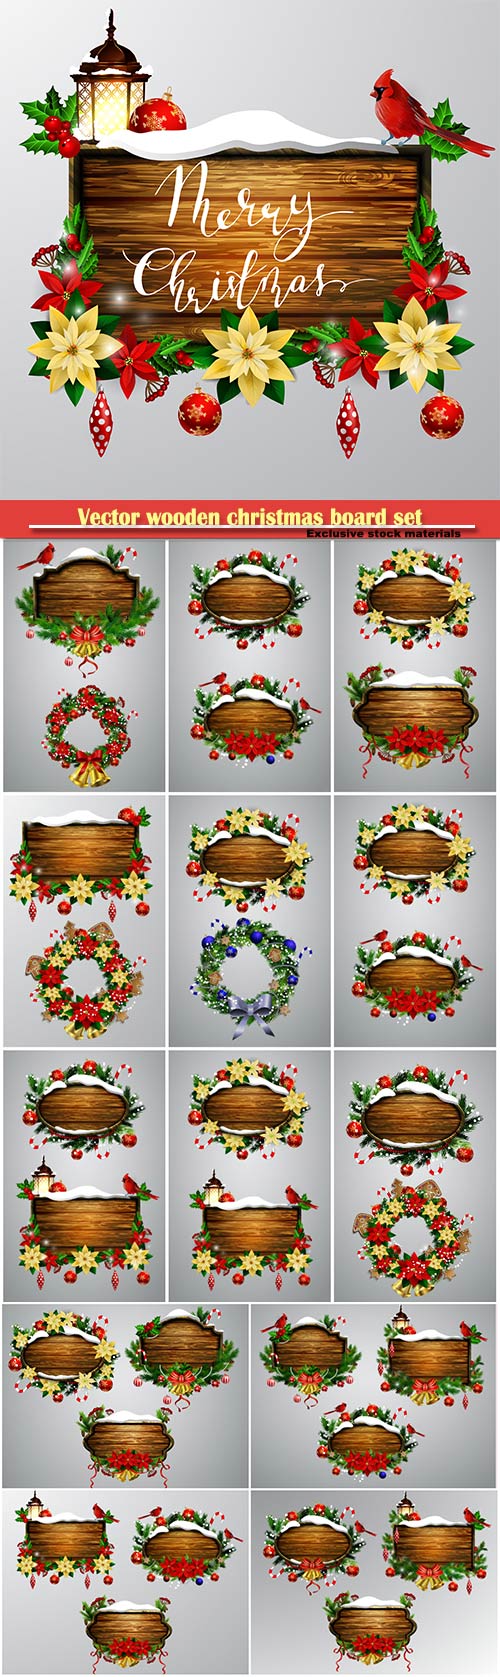 Vector wooden christmas board set with christmas tree and decorations